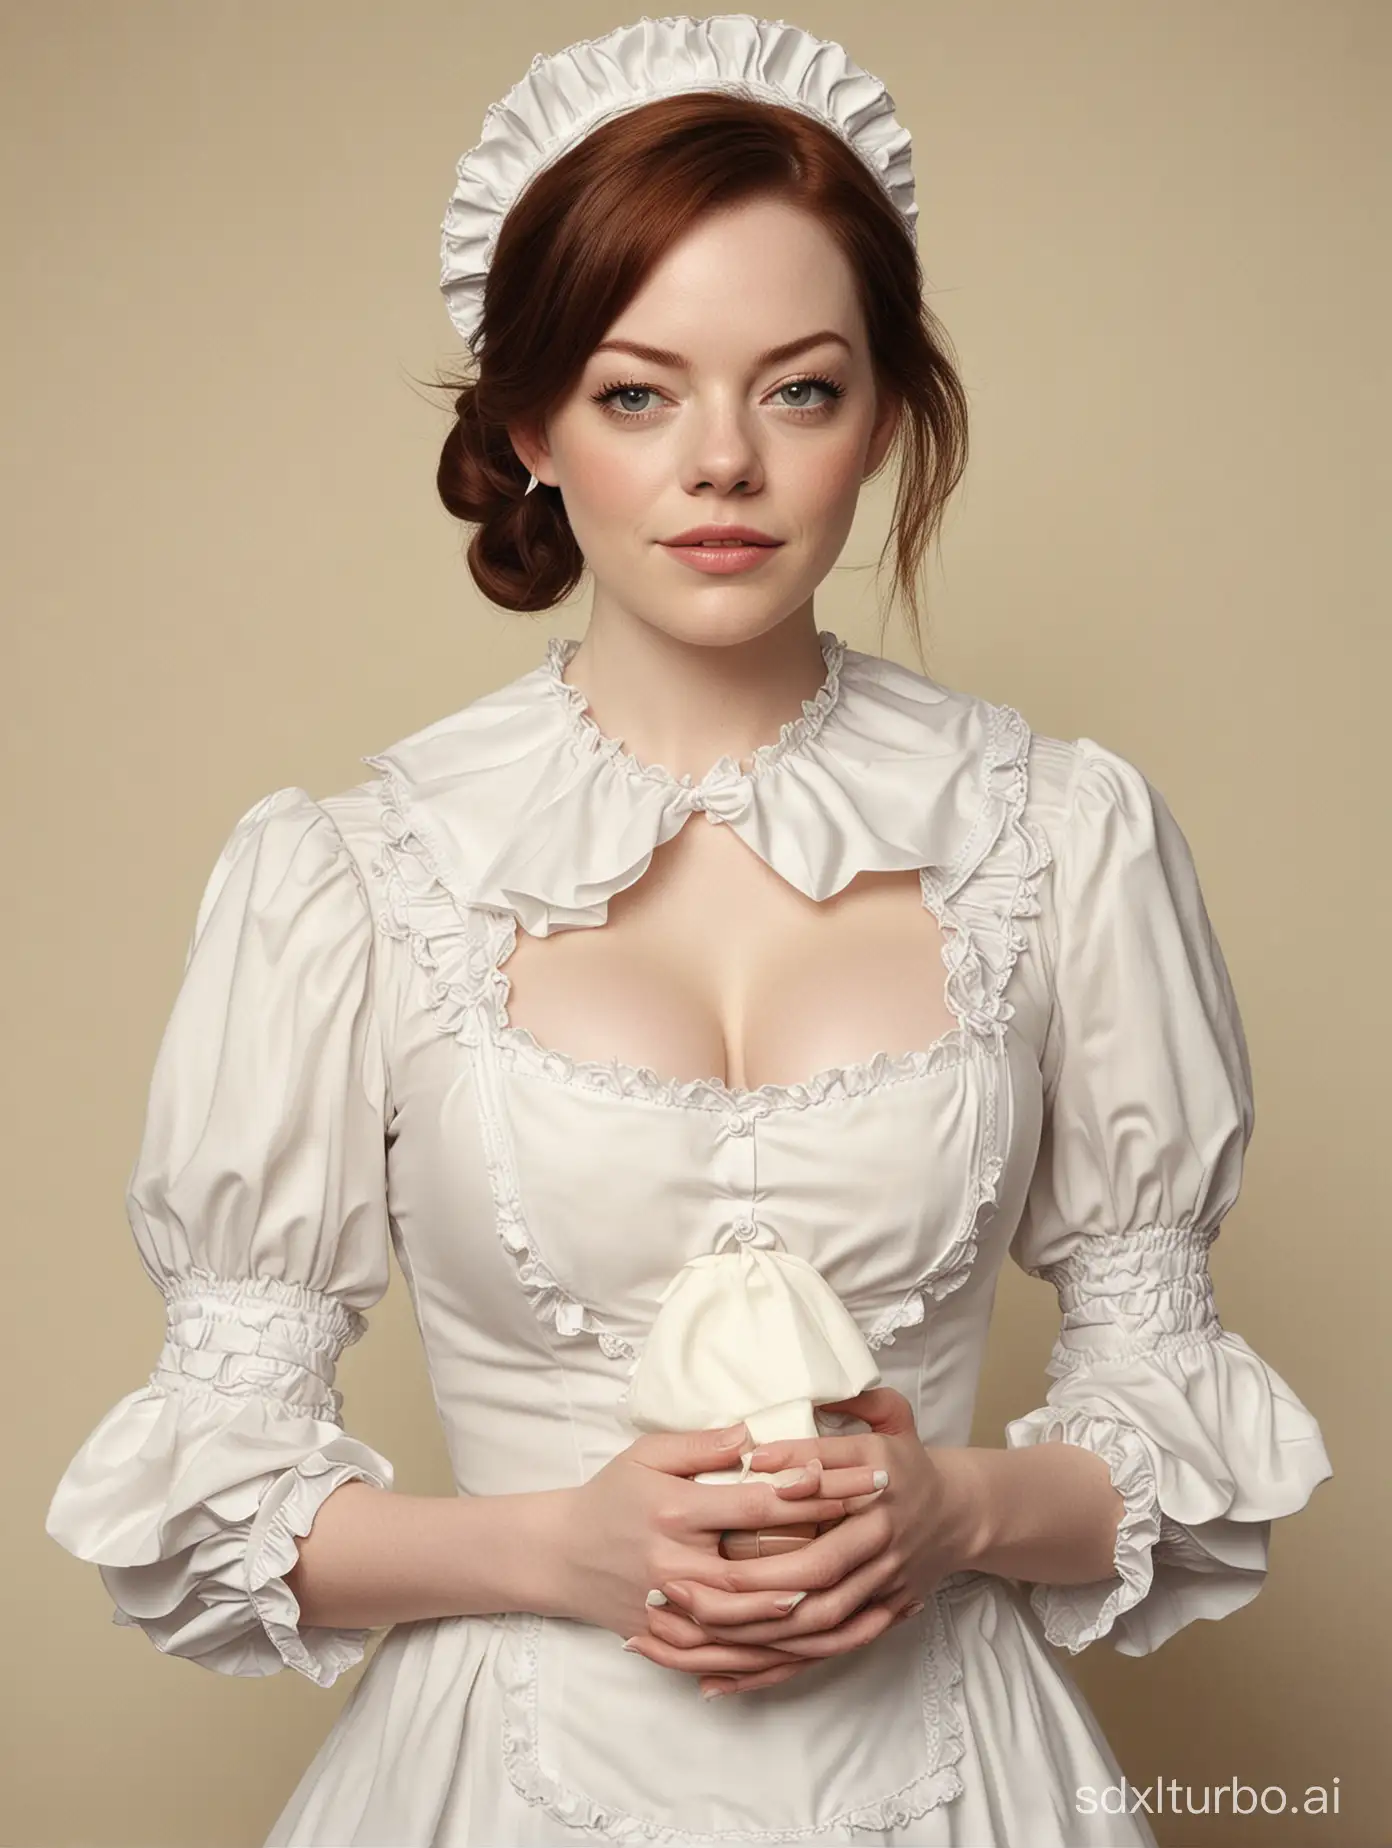 1 woman,like  Emma stone, huge breast，upper body, sexy, maid outfit Photograph by Loretta Lux